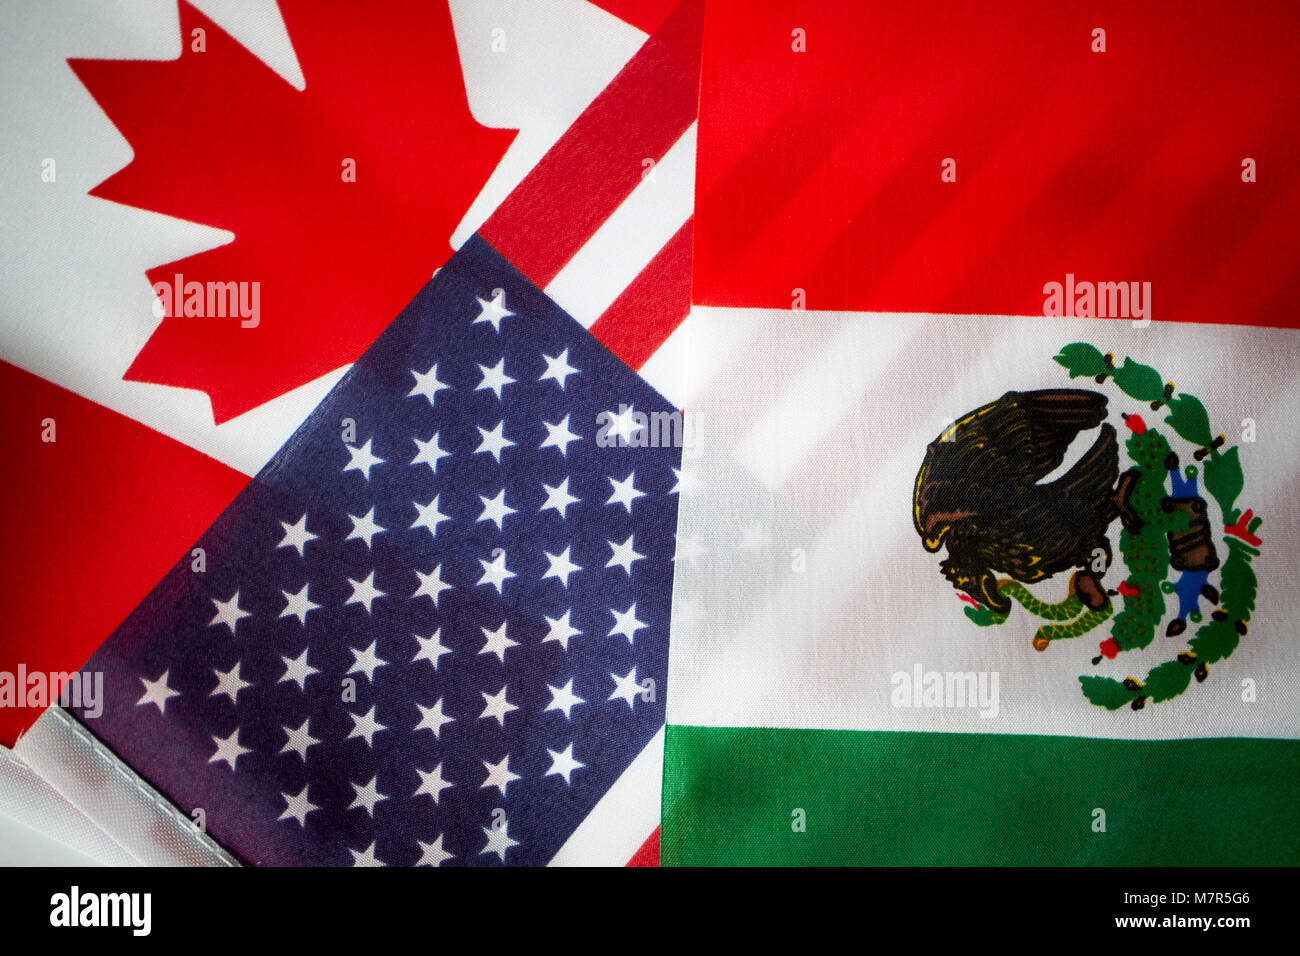 us stars and stripes flag with mexican flag and canadian maple leaf nafta flags Stock Photo